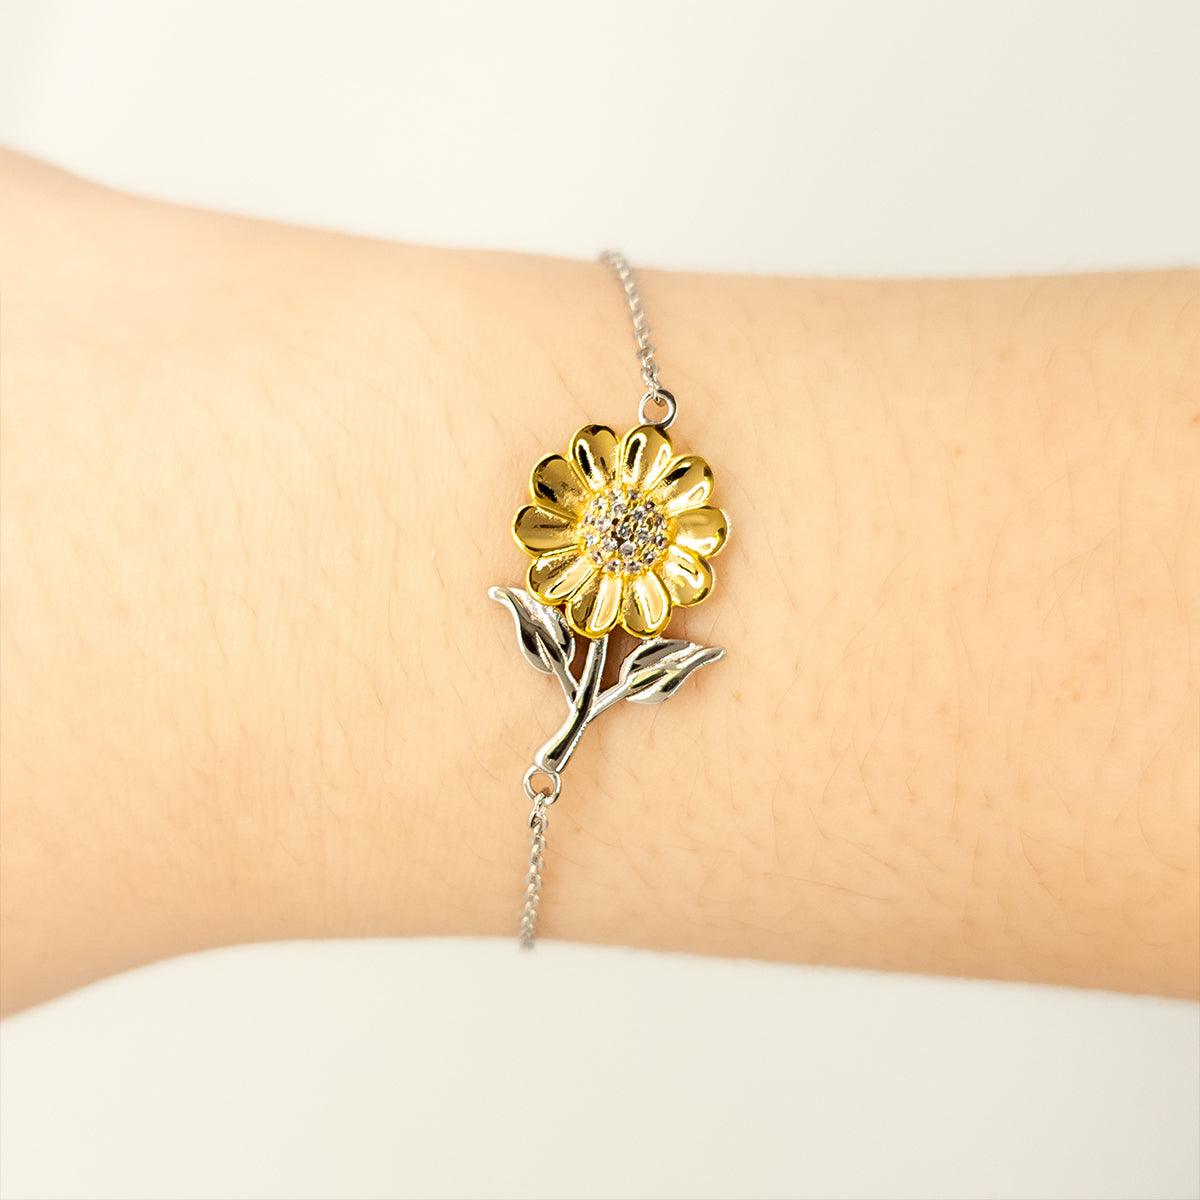 Remarkable Fitness Trainer Gifts, Your dedication and hard work, Inspirational Birthday Christmas Unique Sunflower Bracelet For Fitness Trainer, Coworkers, Men, Women, Friends - Mallard Moon Gift Shop